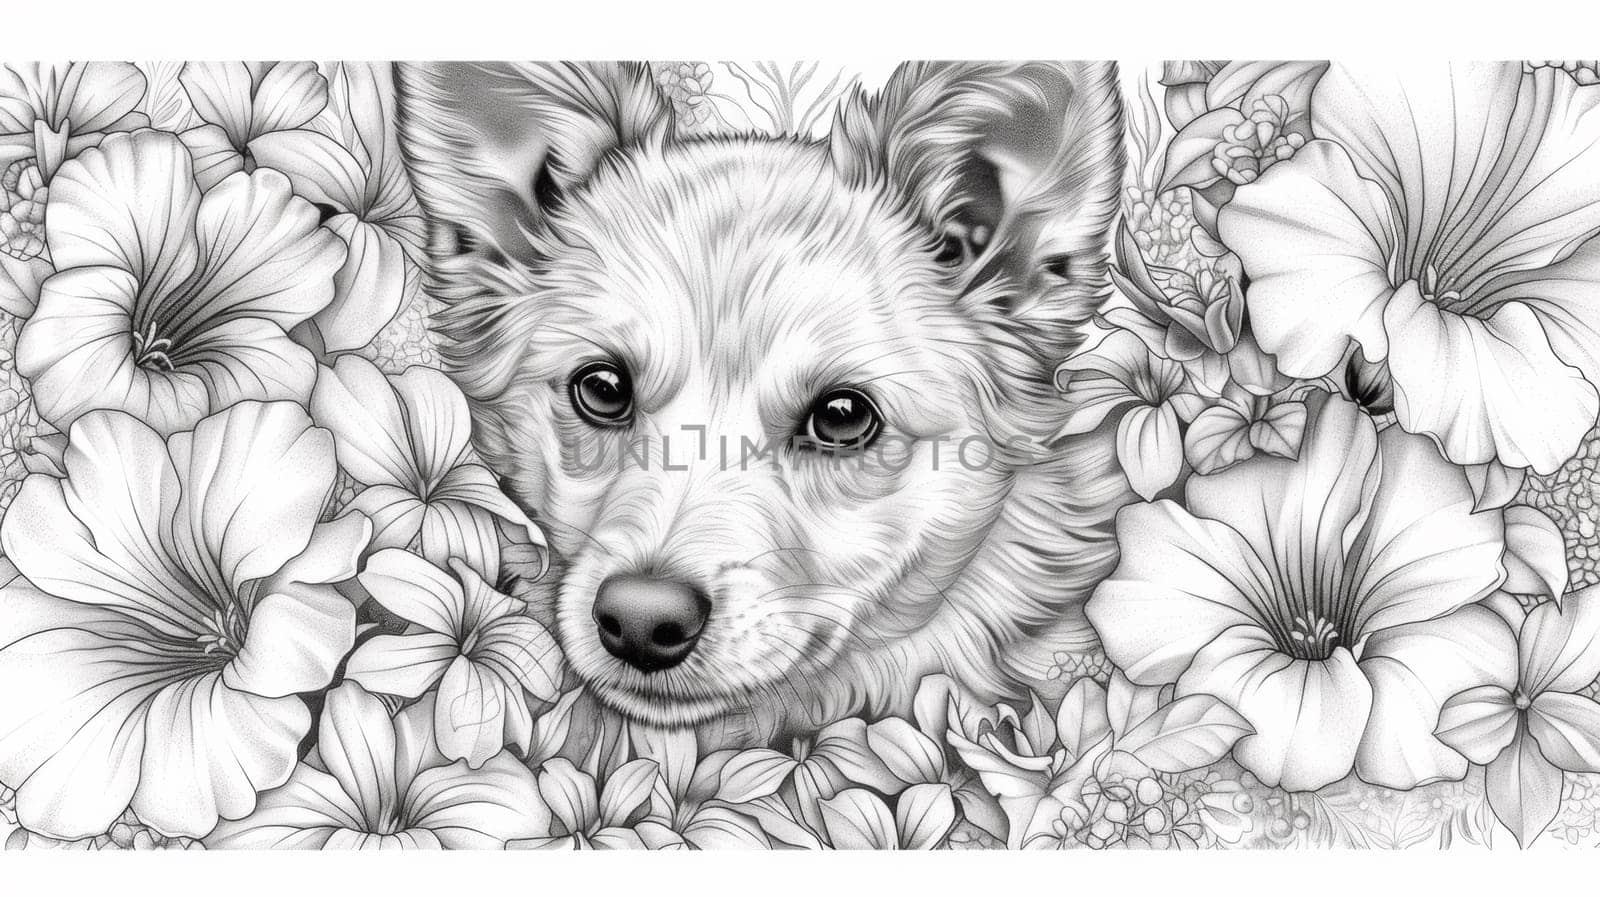 A drawing of a dog surrounded by flowers and leaves